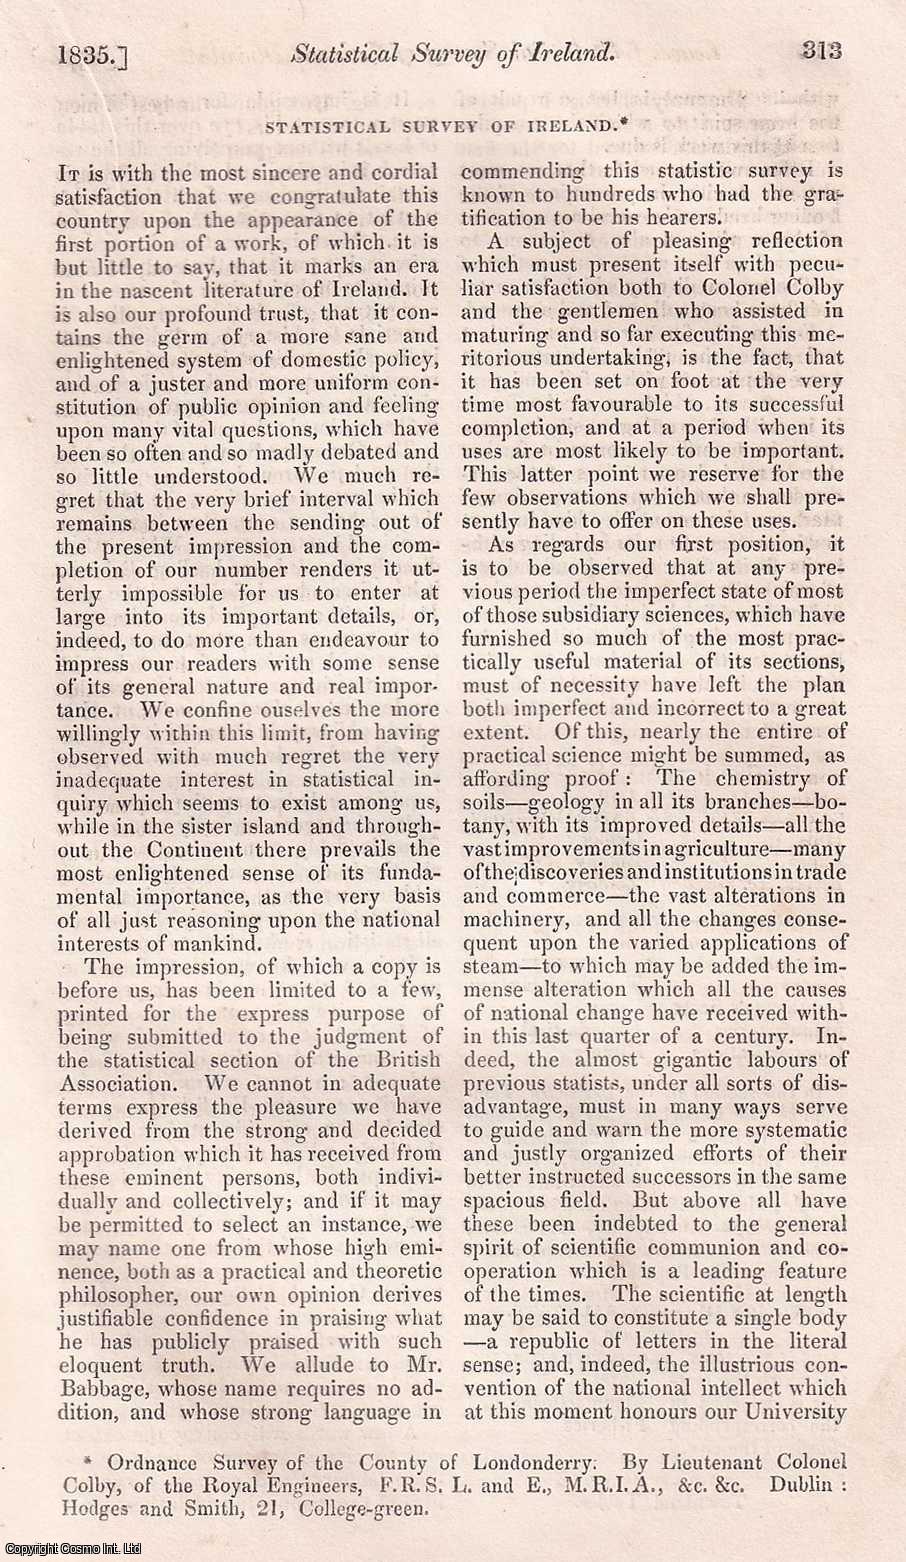 Isaac Butt - Statistical Survery of Ireland. A rare original article from the Dublin University Magazine, 1835.